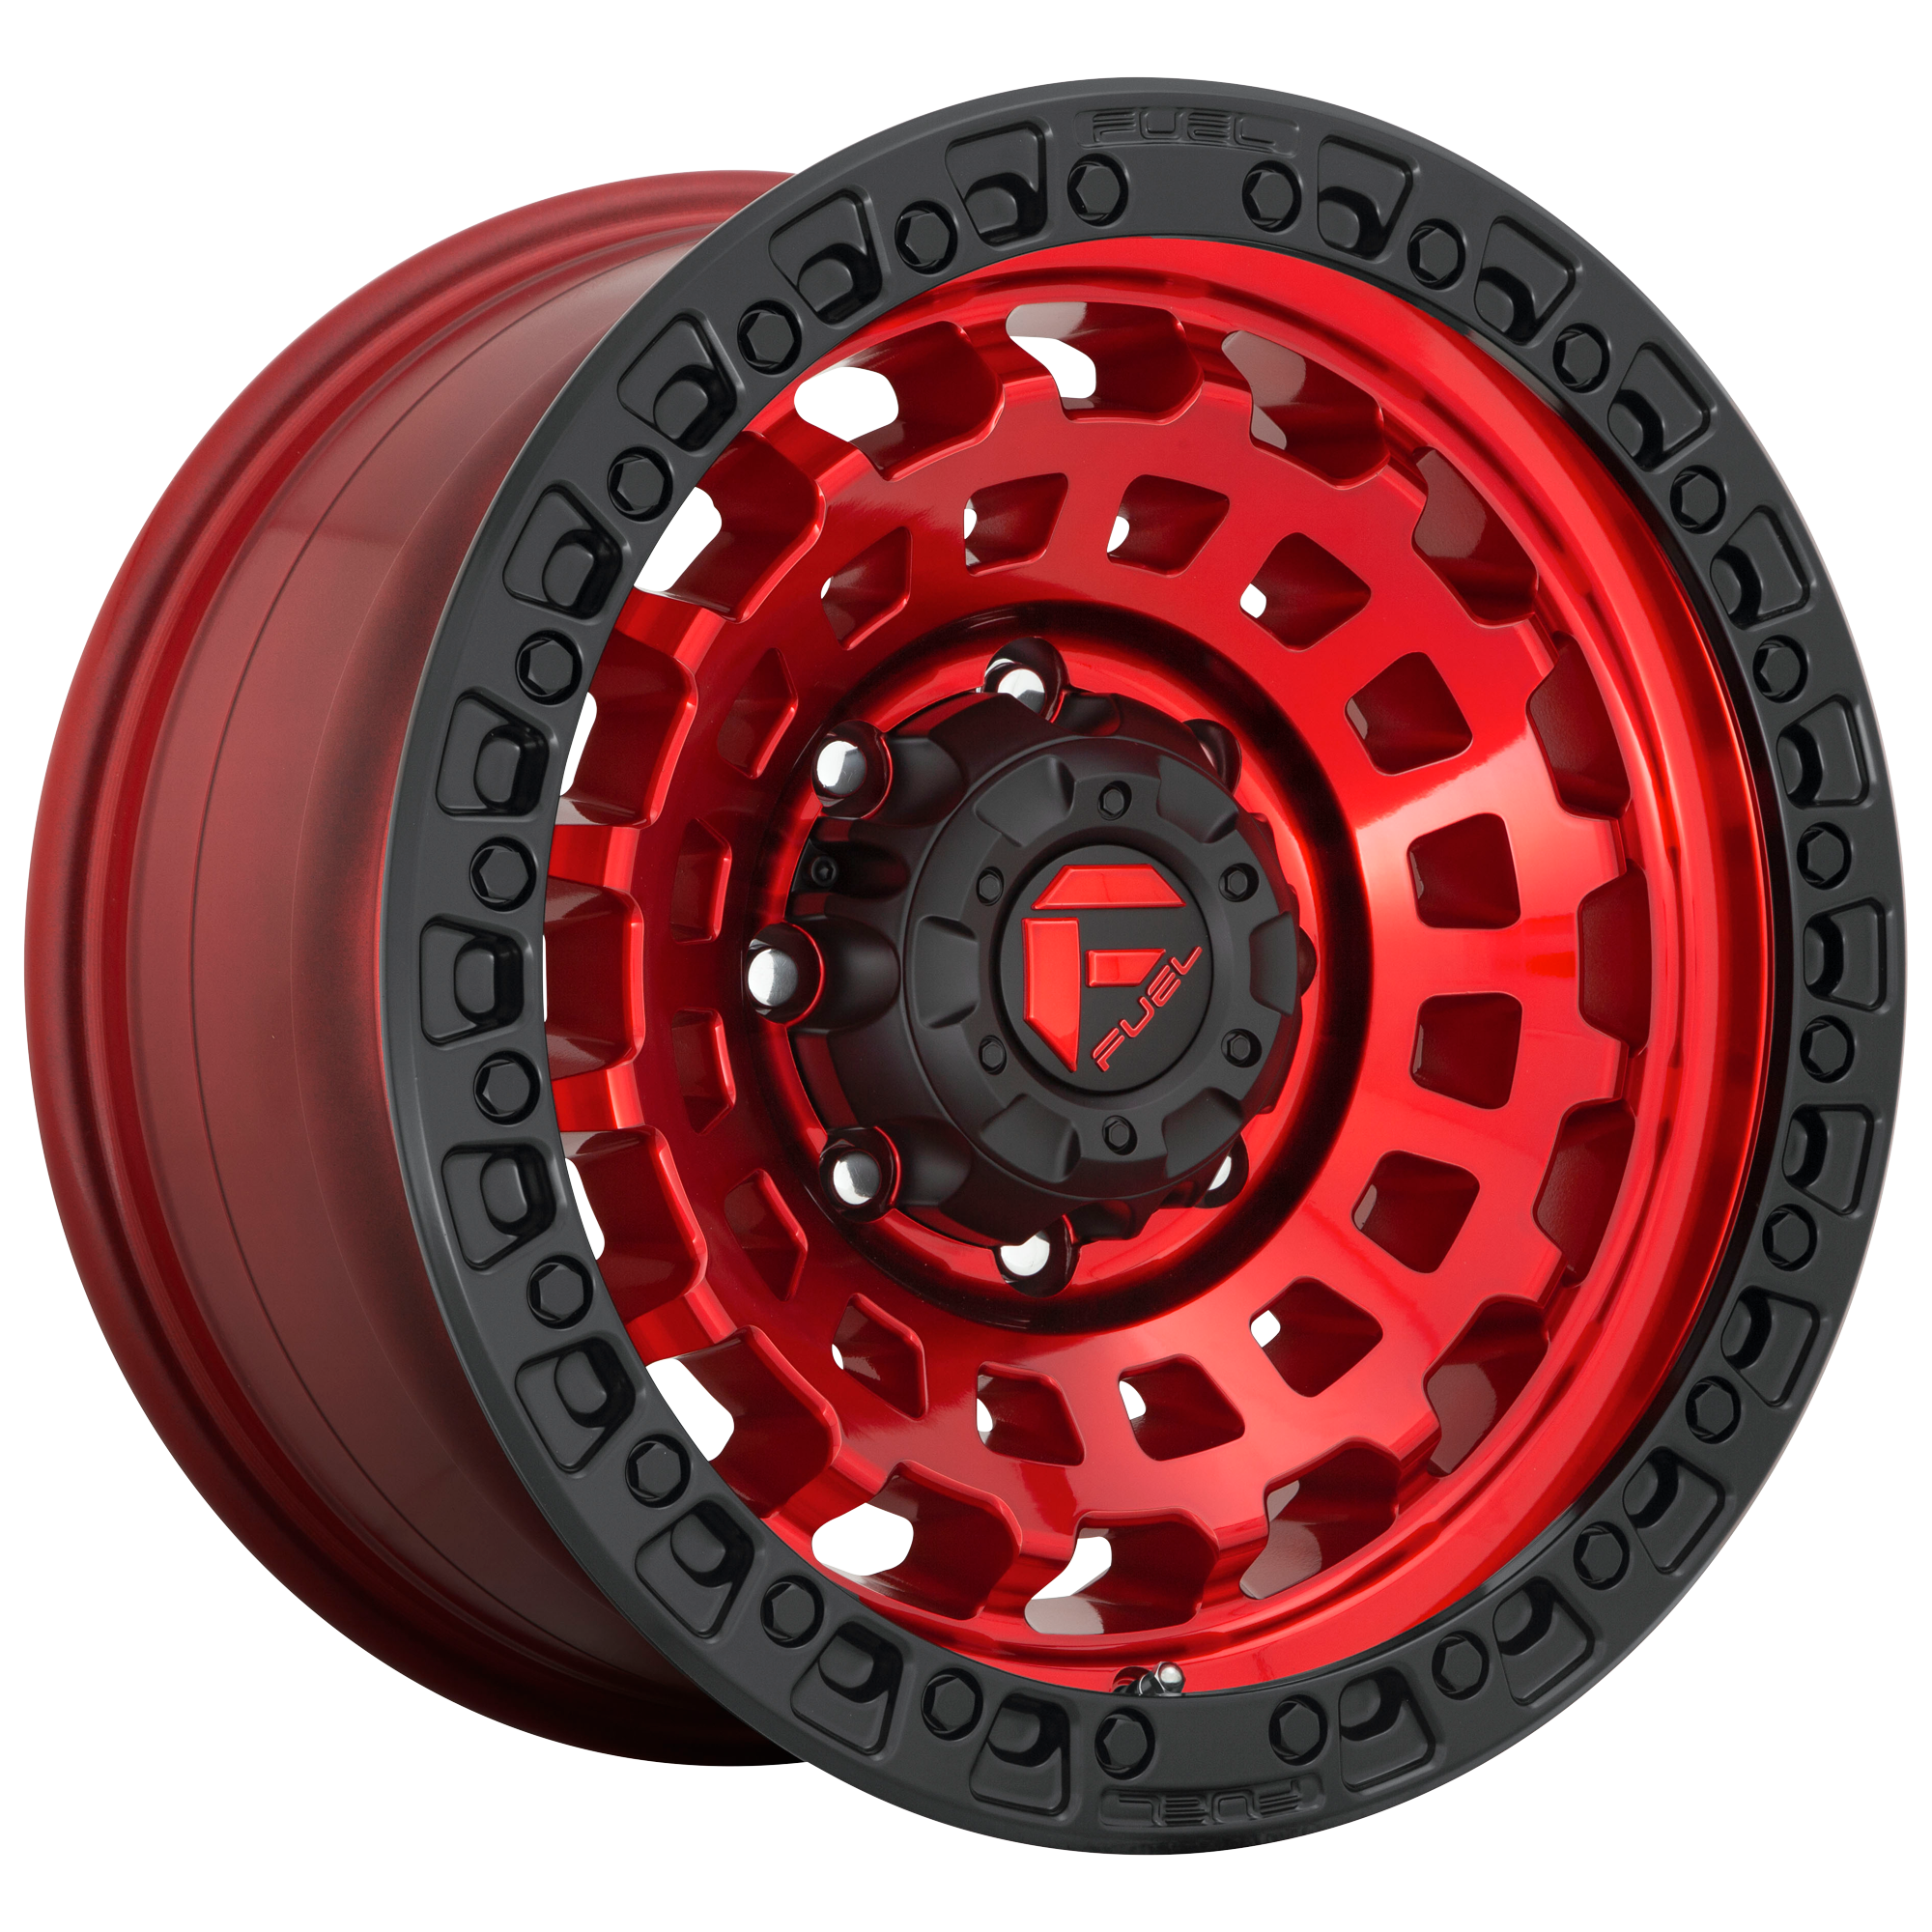 ZEPHYR 17x9 6x135.00 CANDY RED BLACK BEAD RING (-12 mm) - Tires and Engine Performance